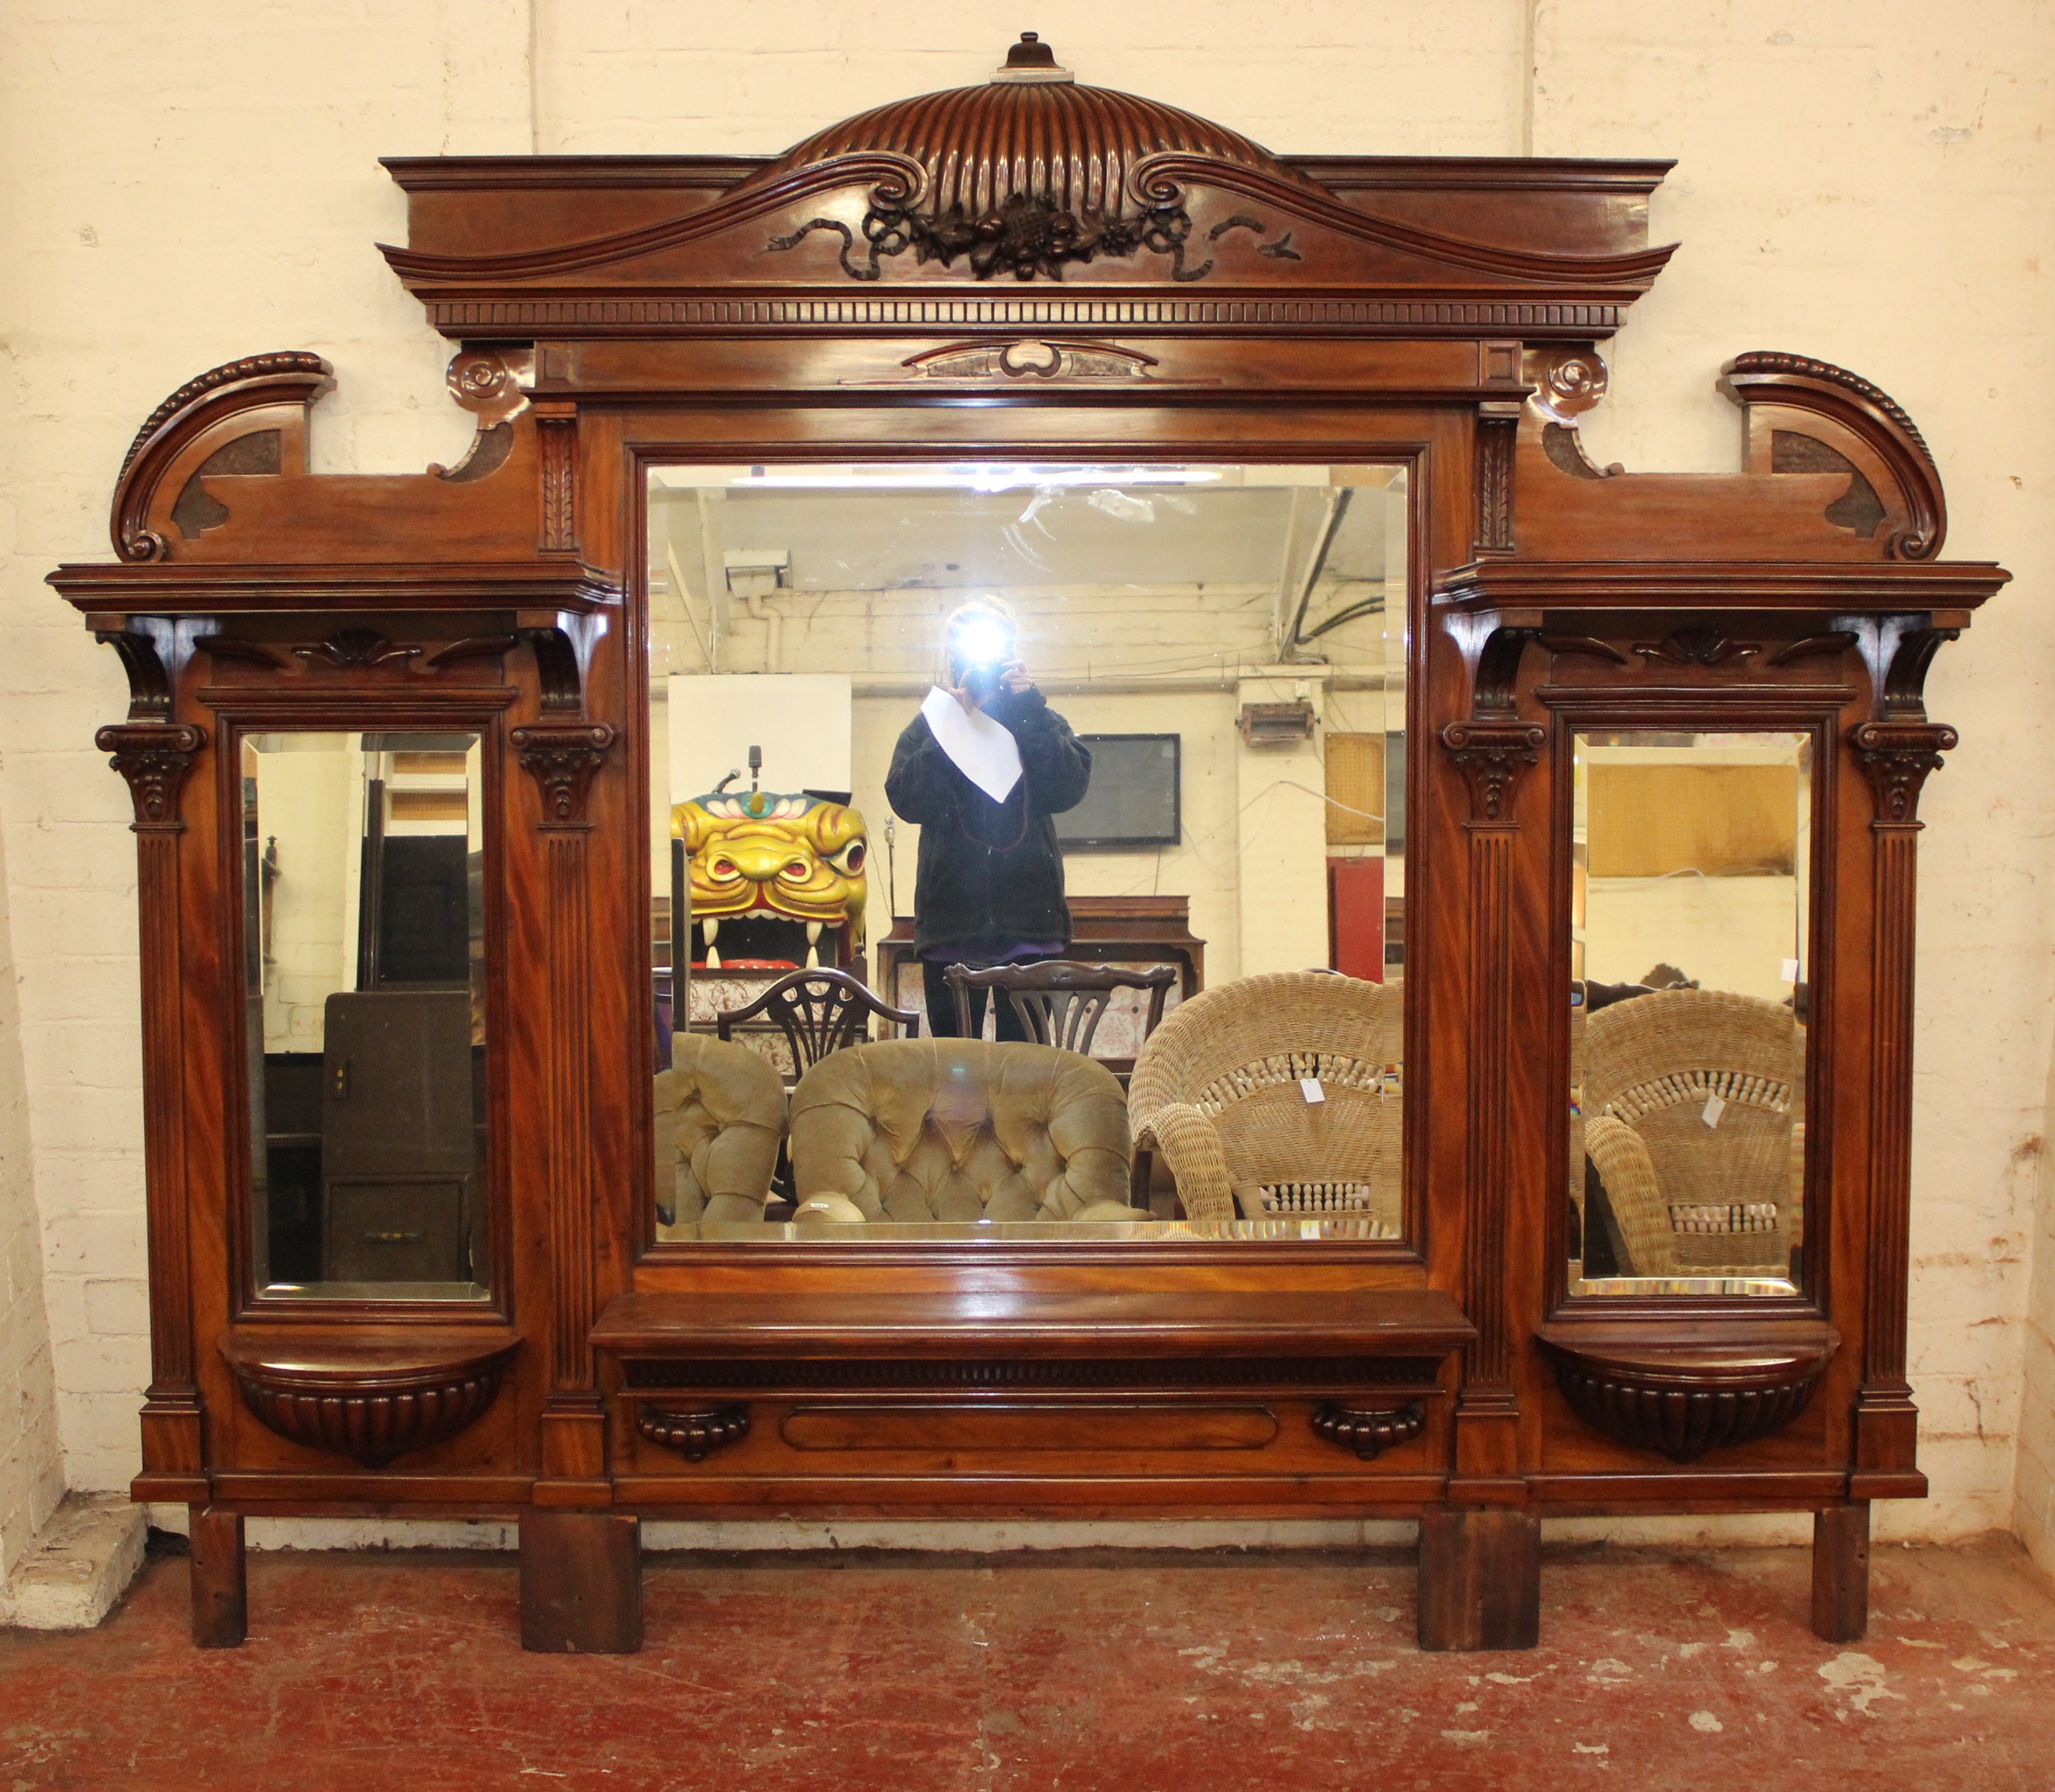 A late Edwardian mahogany mirror back sideboard of large proportions with drawers and cupboards